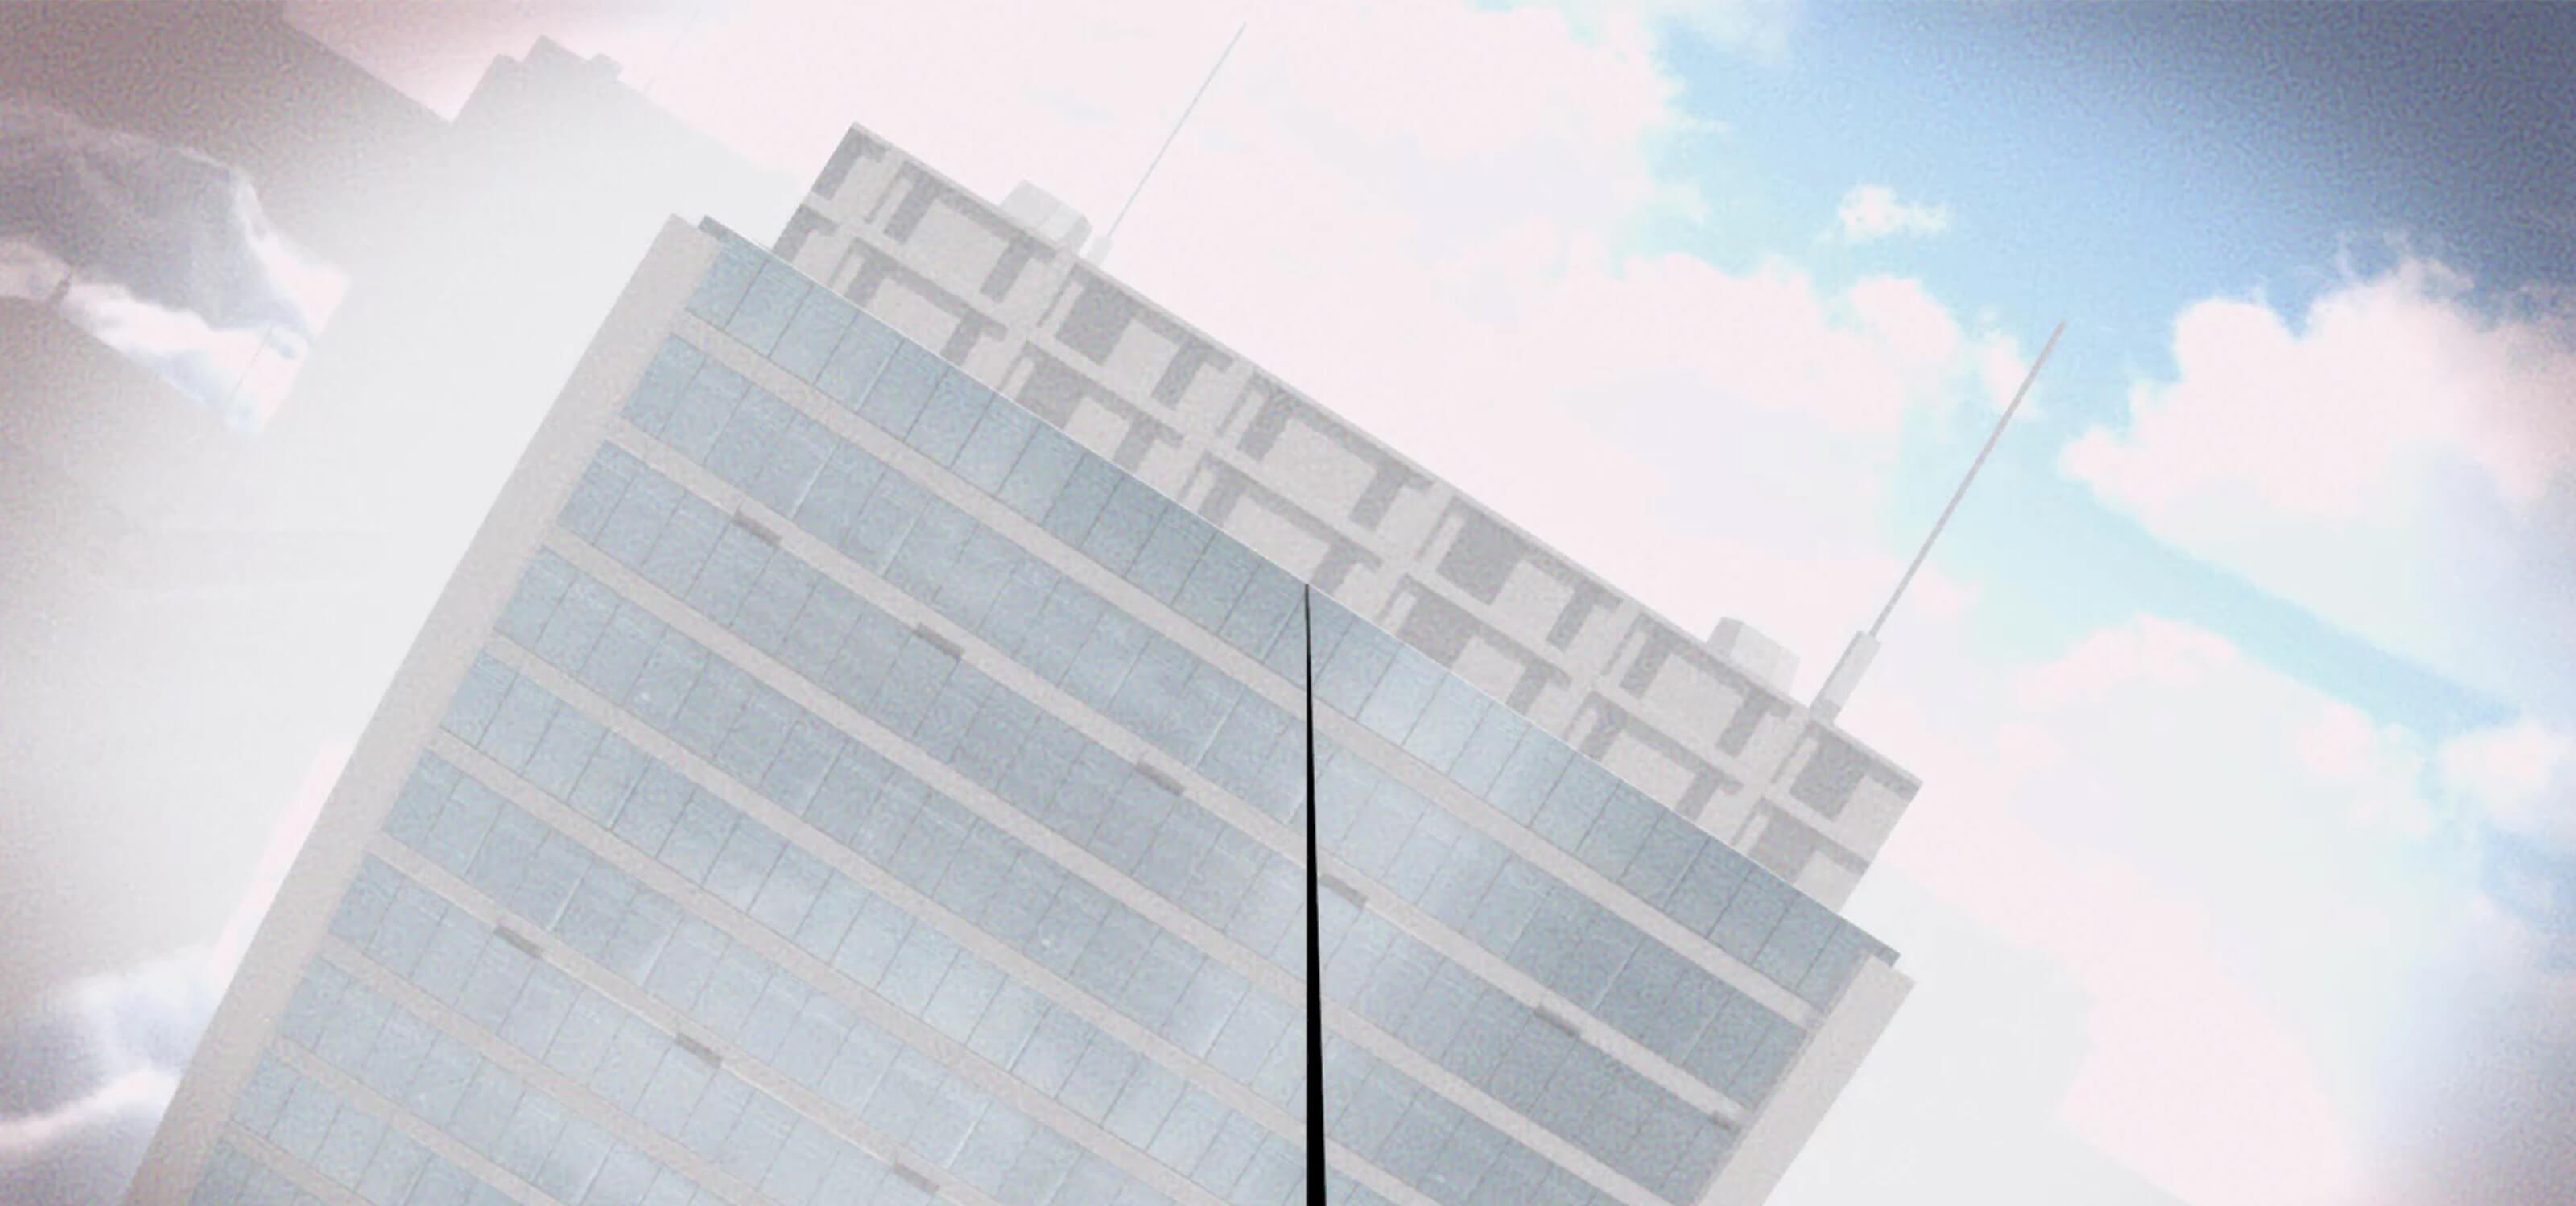 A tilted first-person perspective of someone walking a tightrope to a distant building.